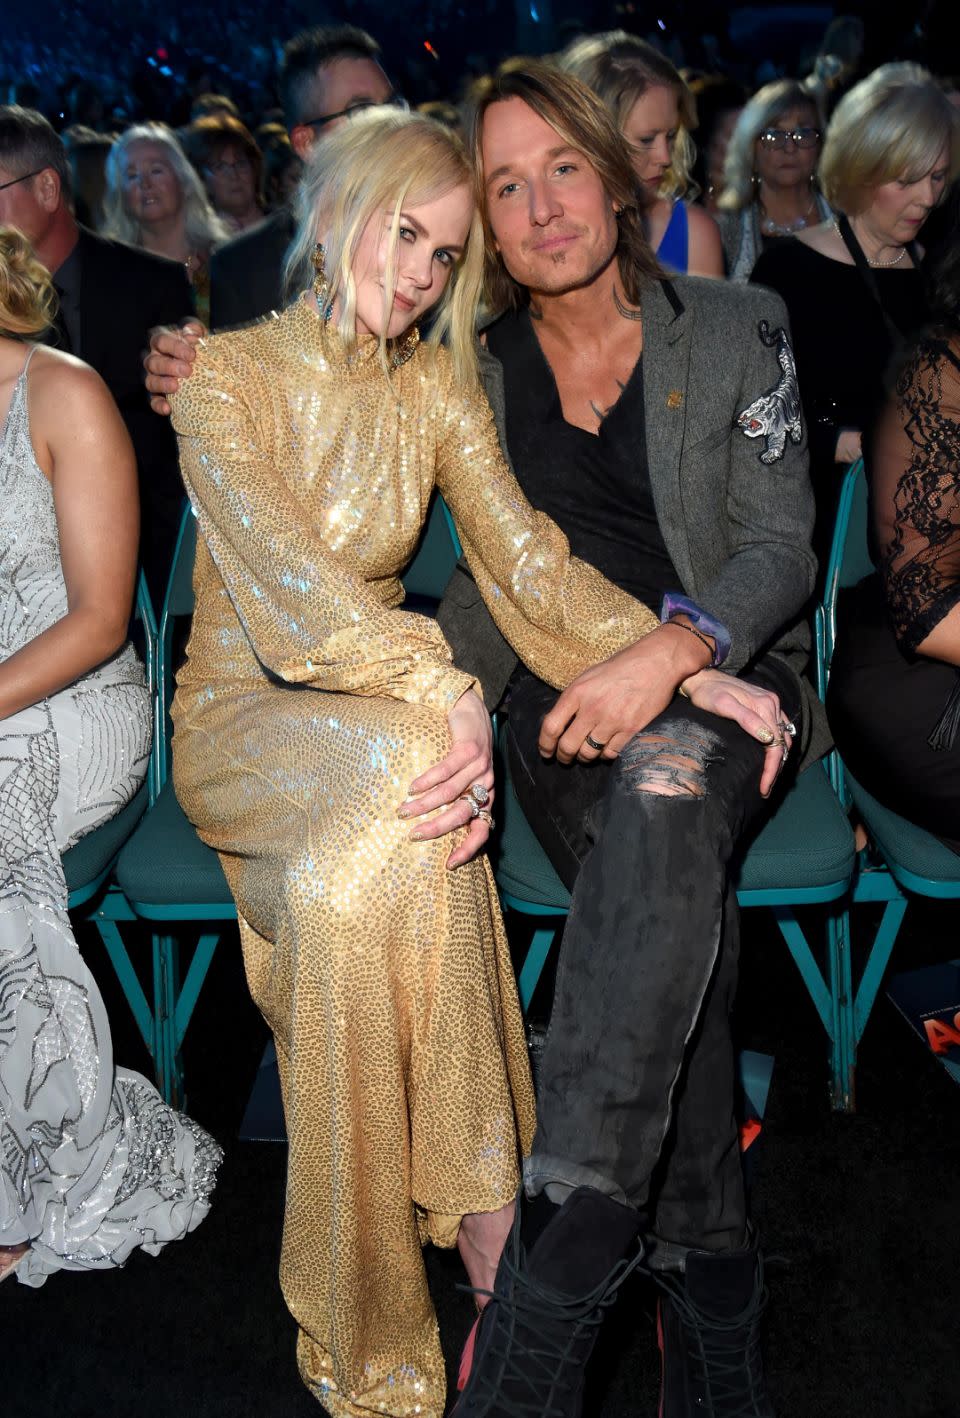 No signs of a breakup here. Source: Getty